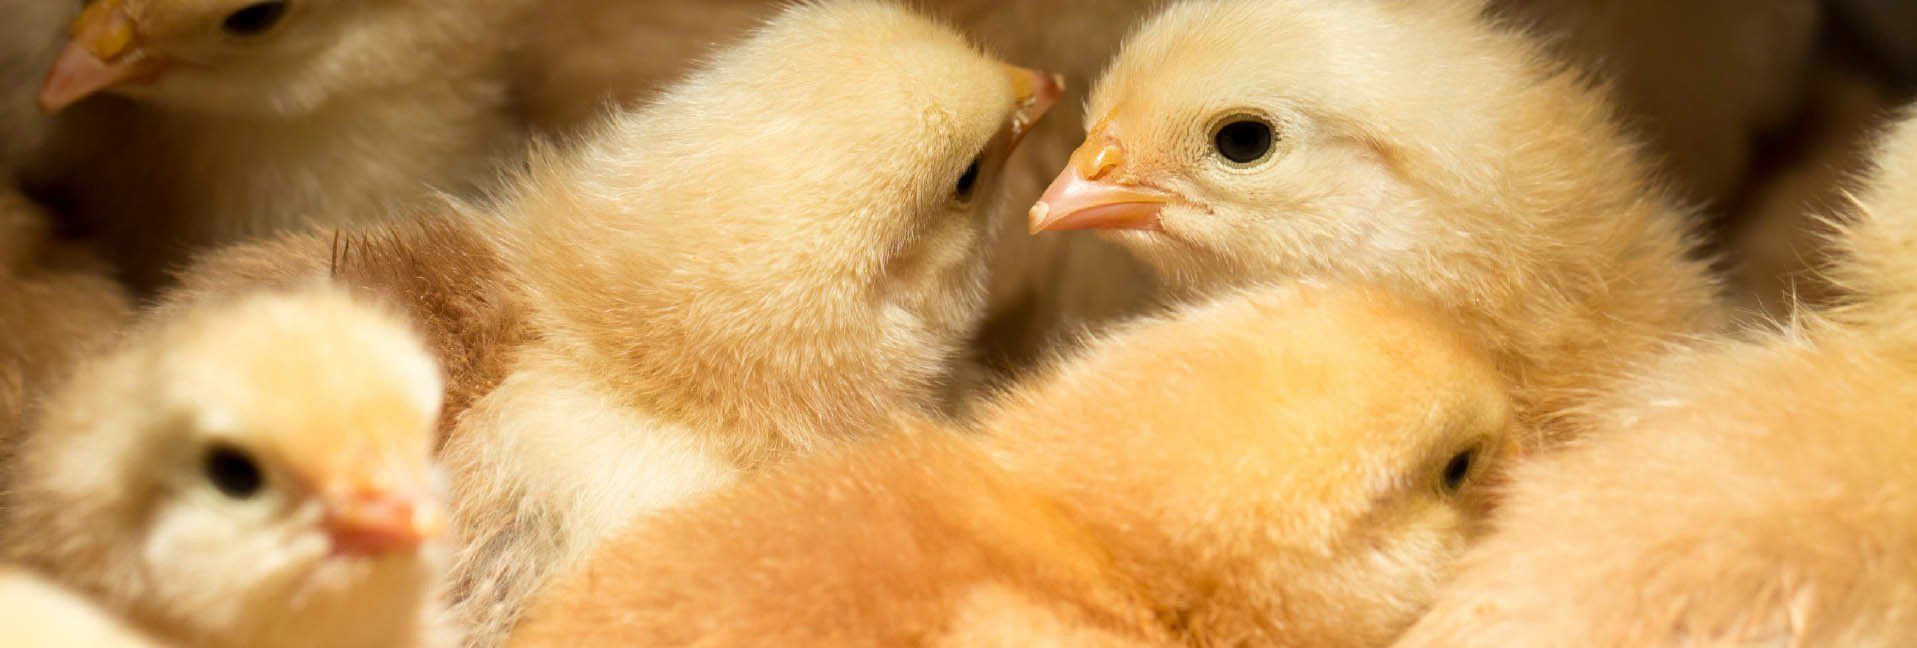 Vaccinating Strategies for Chicks